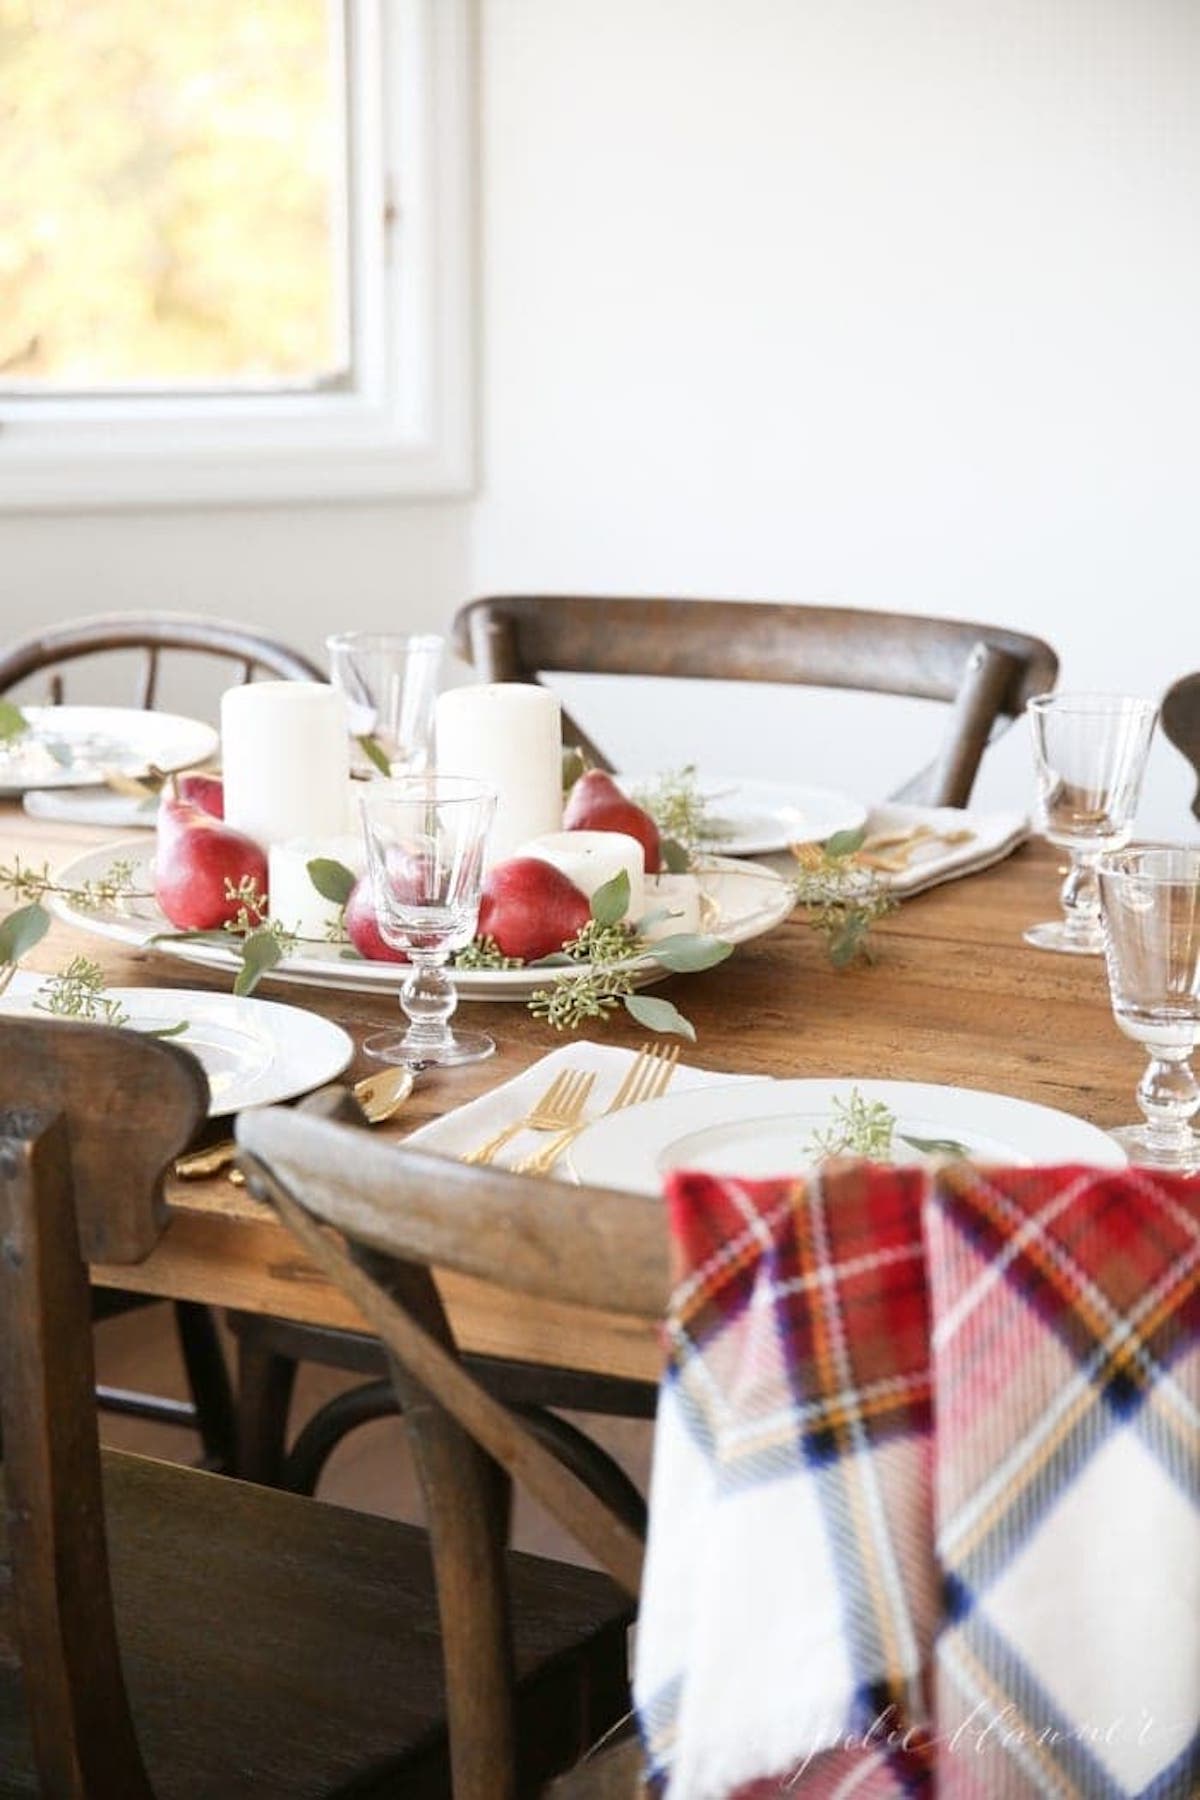 A Christmas table setting with a plaid tablecloth and Thanksgiving centerpieces.